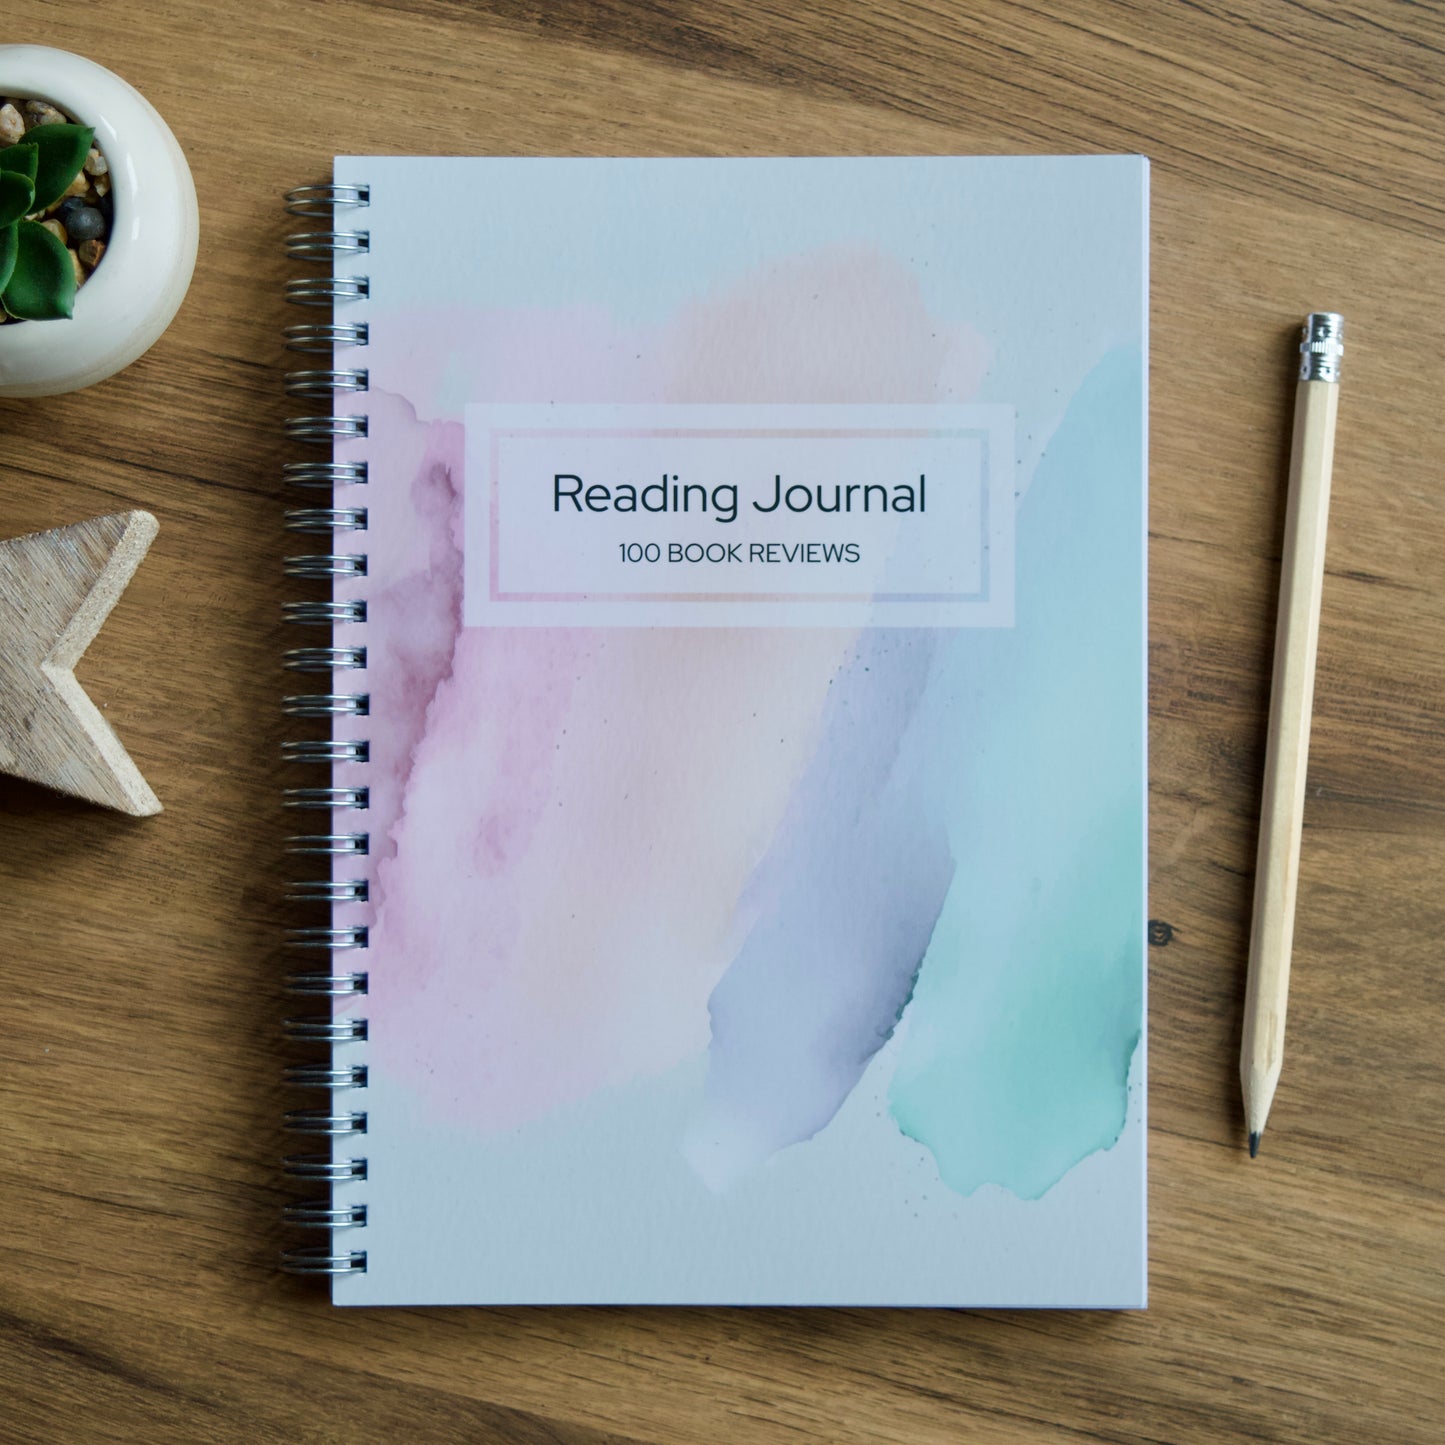 Reading Journal - A5 Wiro 100 Book Reviews